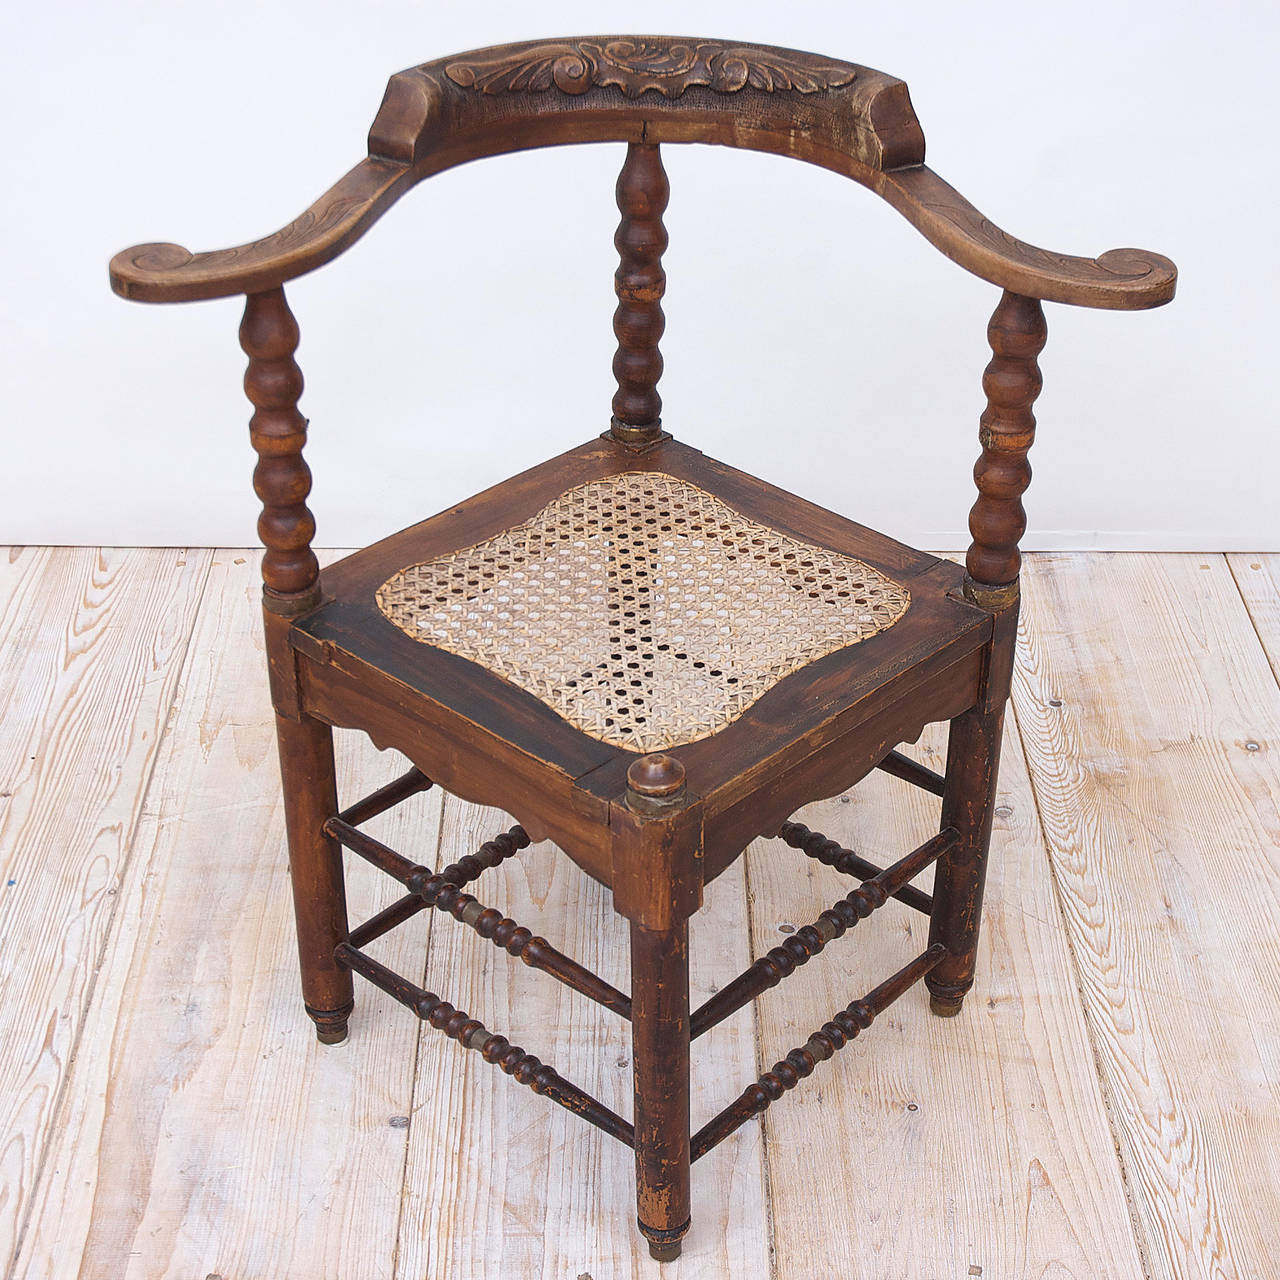 A Dutch colonial corner chair from Dutch Guiana (Suriname) in turned and carved painted wood with caning, circa 1800.
Measures: 28